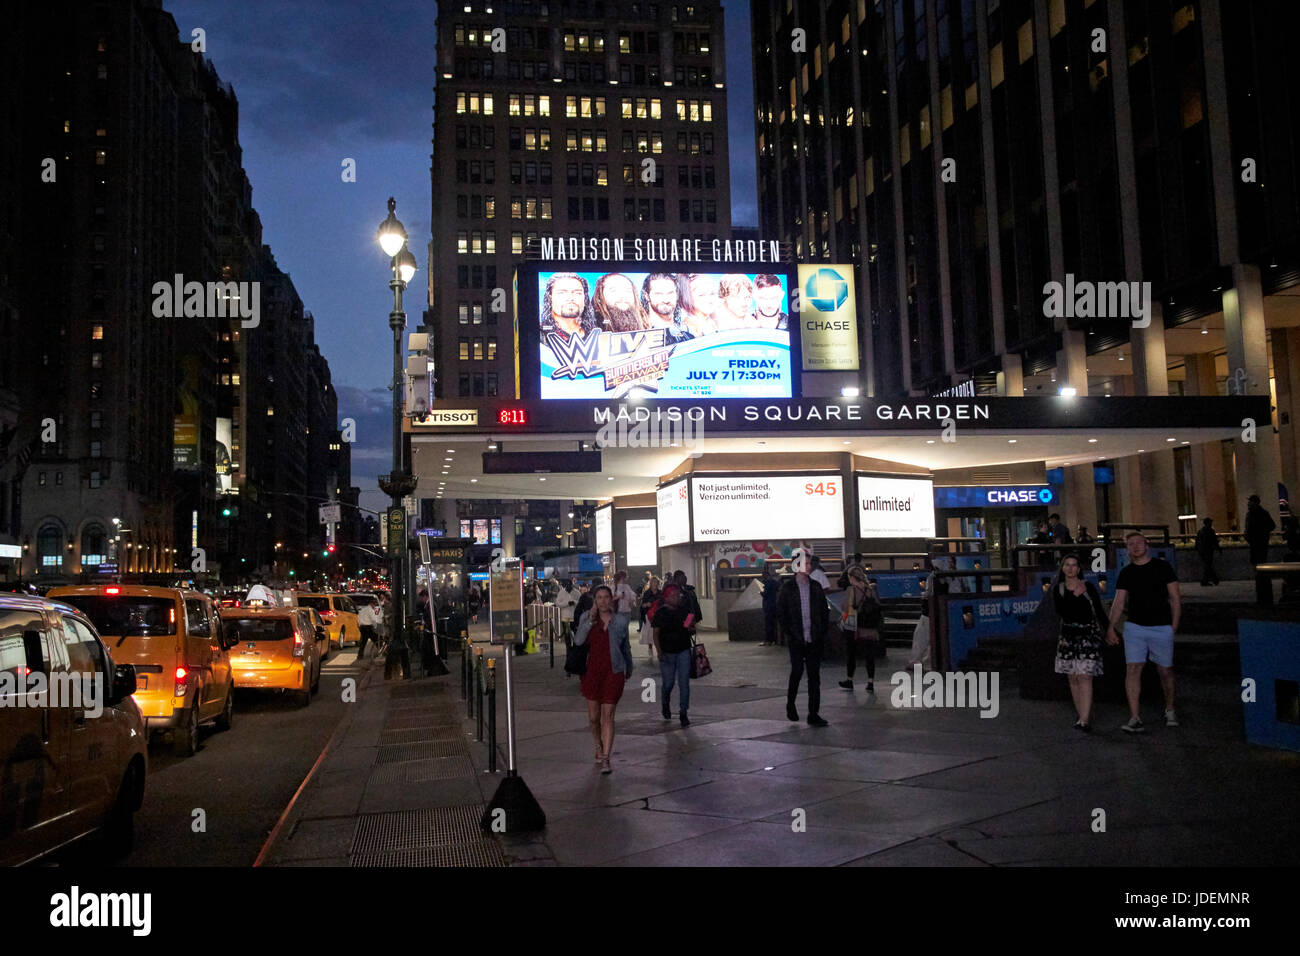 Entrance To Madison Square Garden At Night New York City Usa Stock